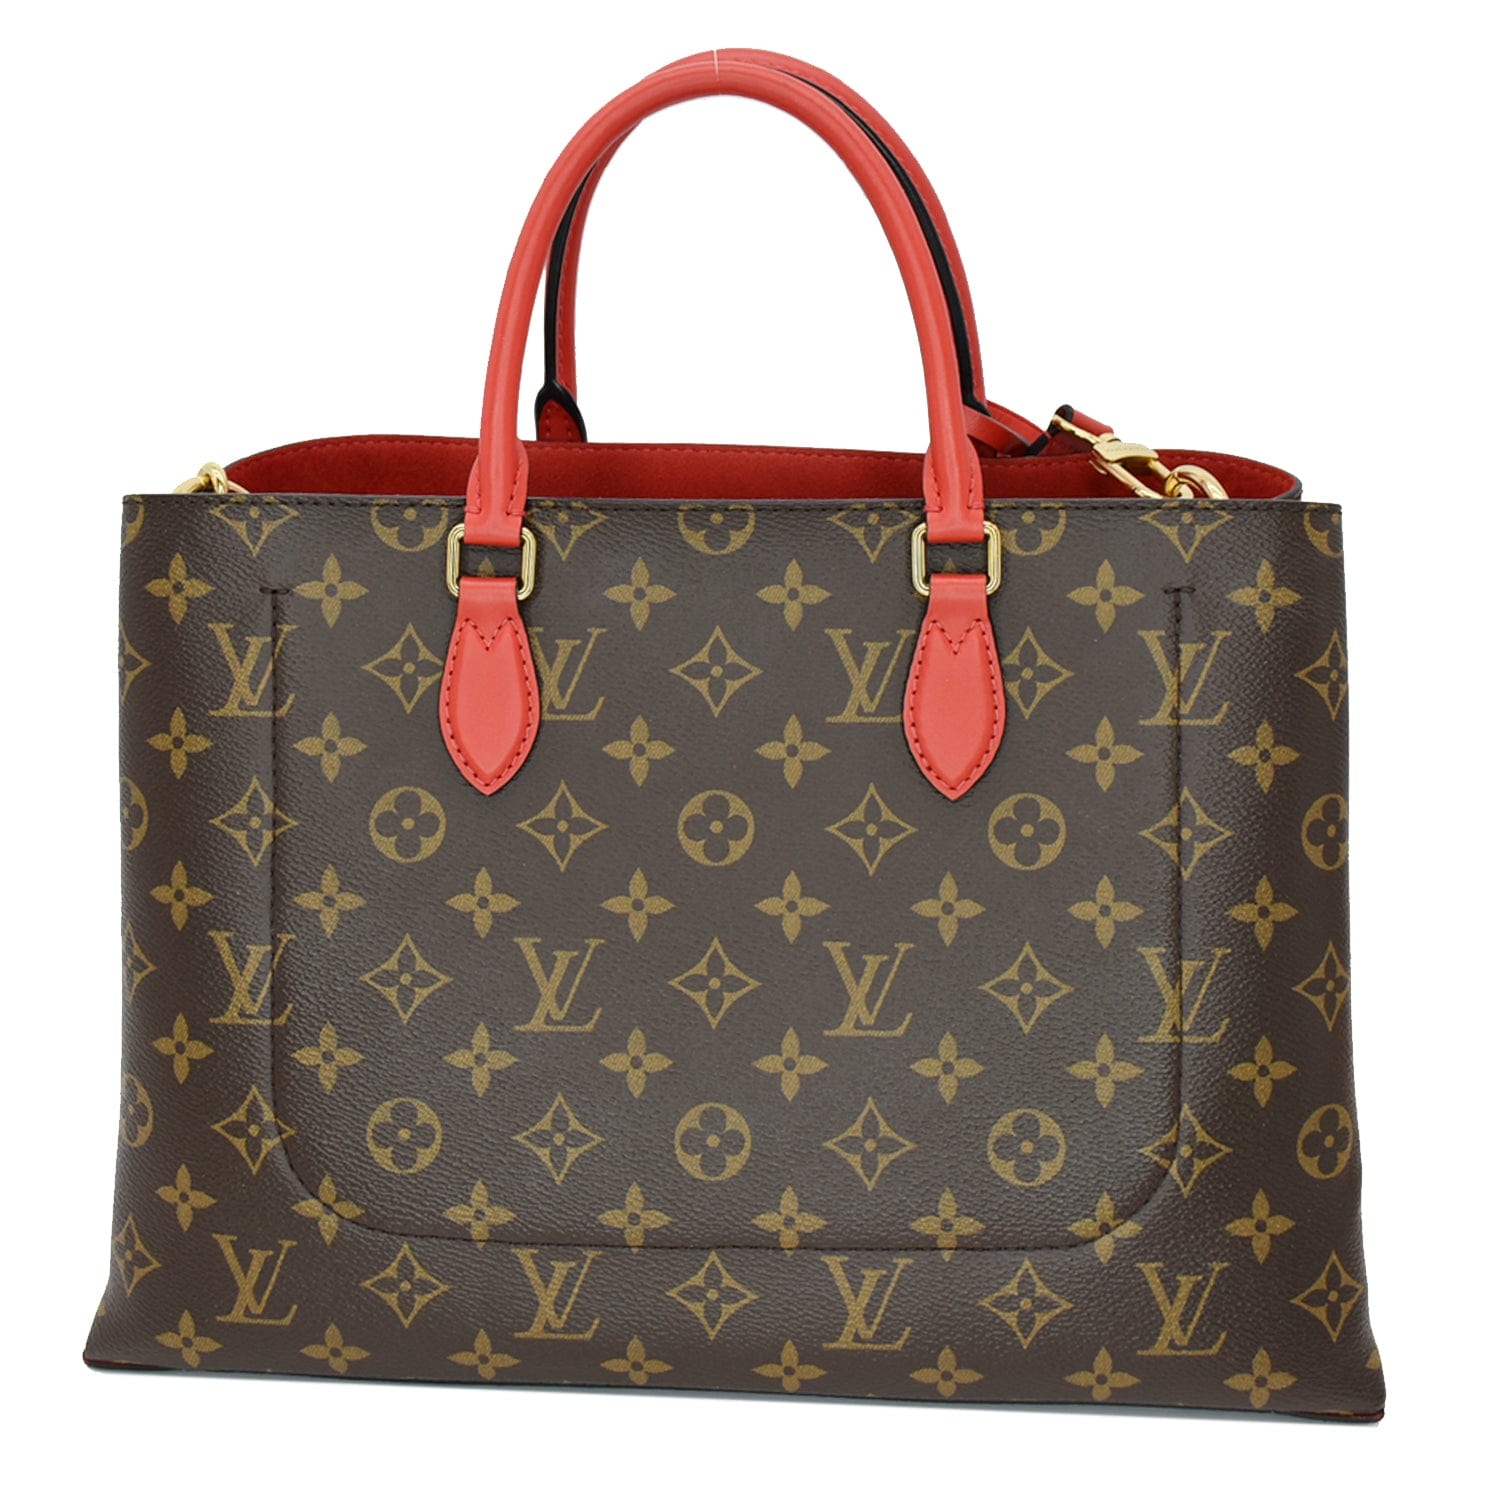 Louis Vuitton Tote Red Bags & Handbags for Women, Authenticity Guaranteed